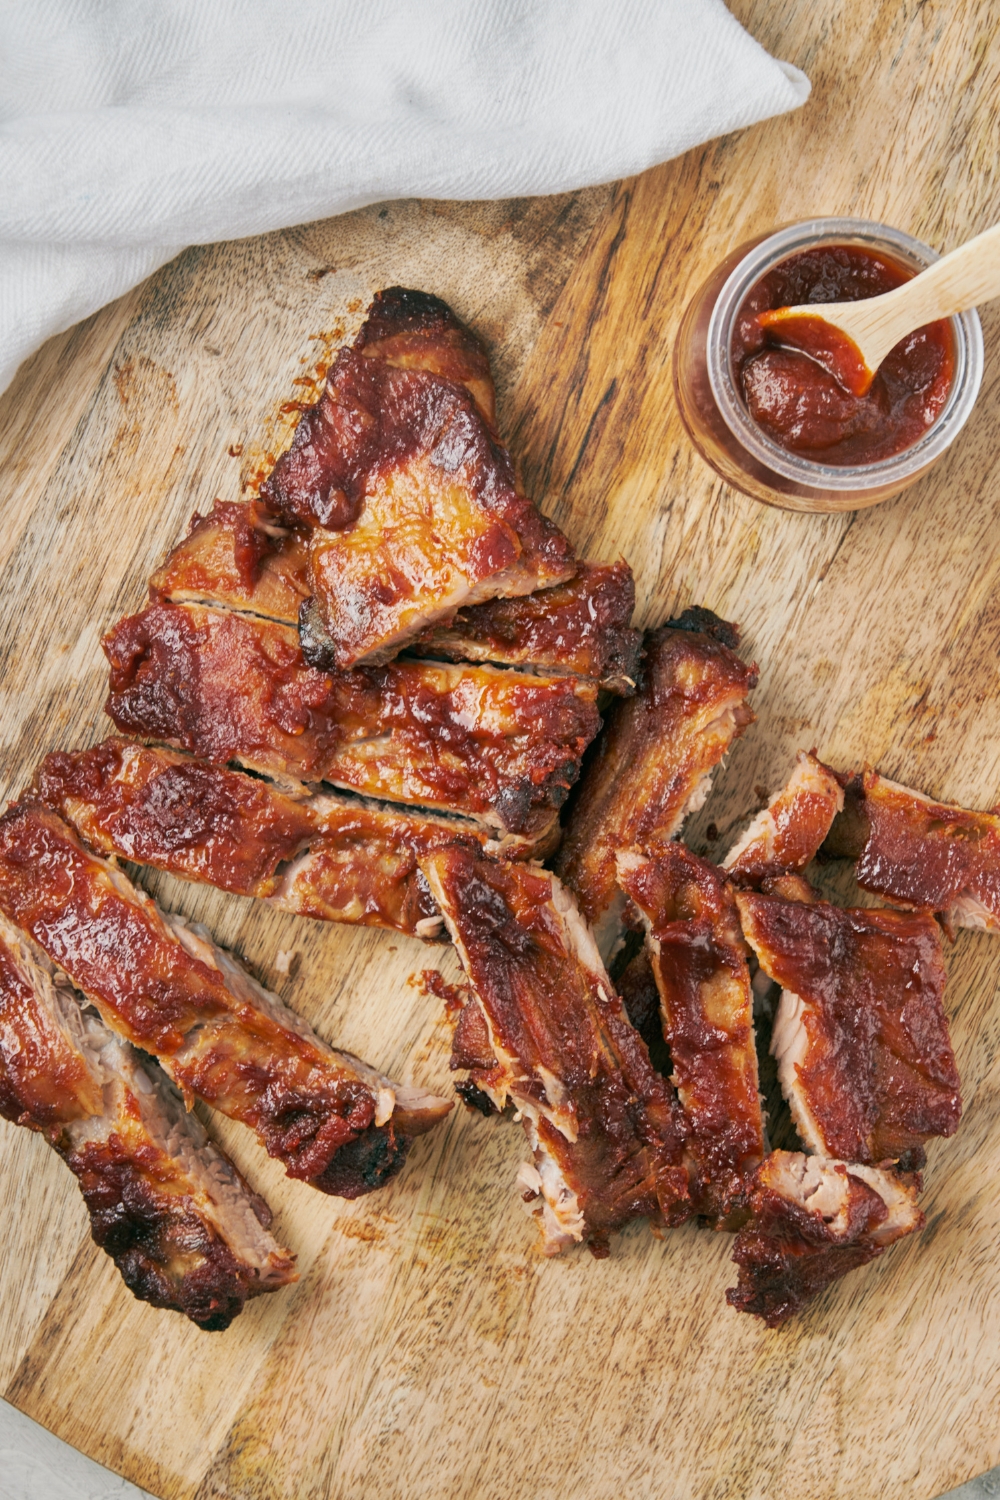 Riblets on top of a wooden cutting board with a glass jar of bbq sauce next to them.